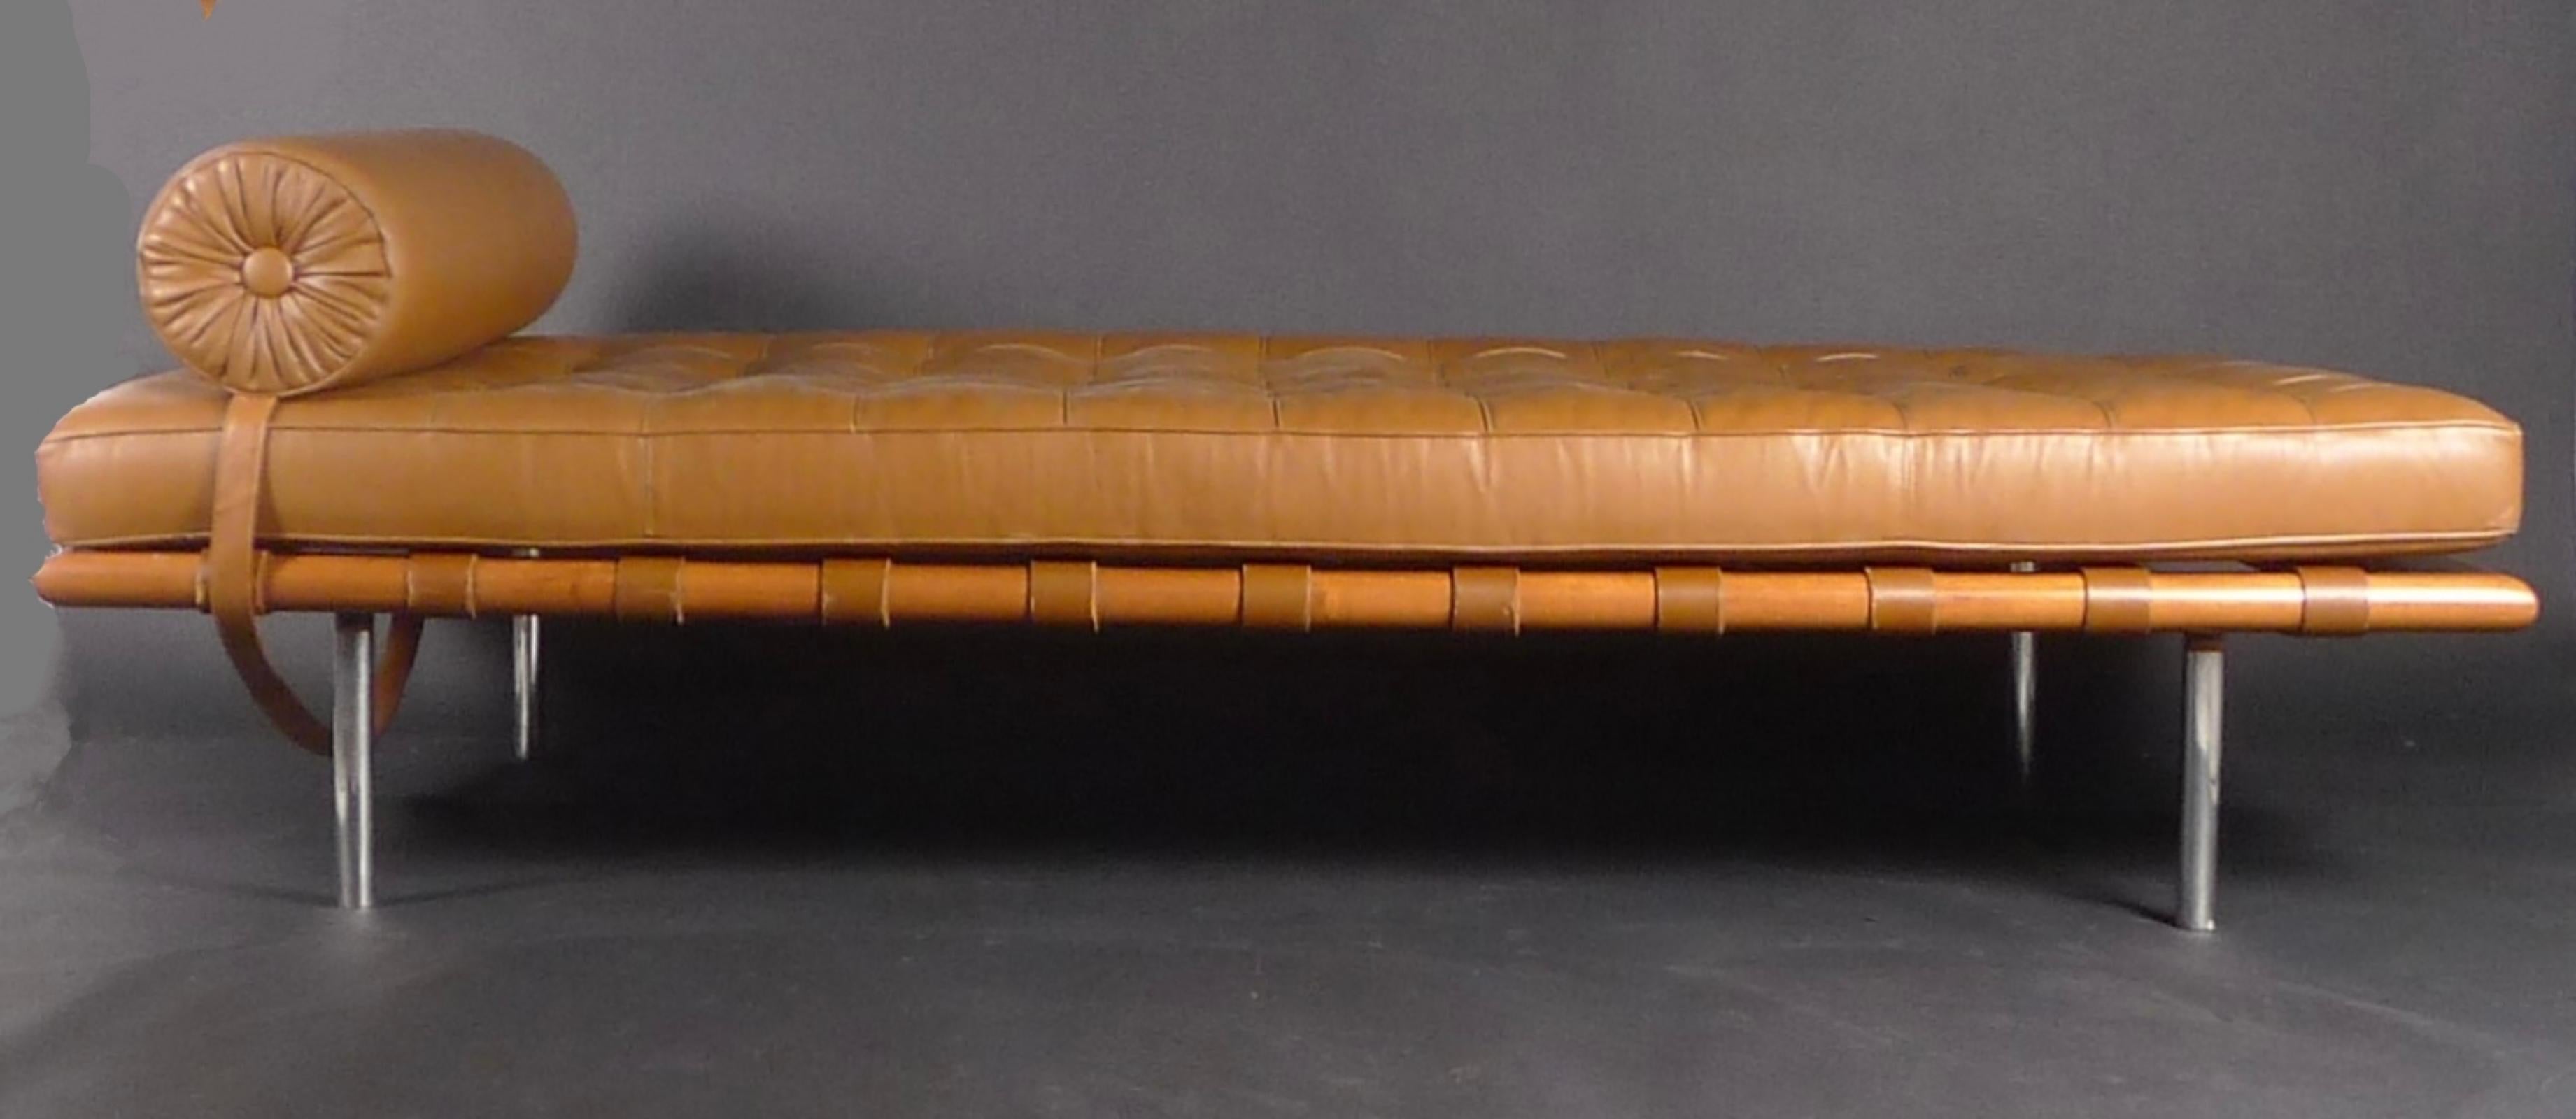 Barcelona Daybed, designed by Mies van Der Rohe for the German Pavilion at the 1929 International Exposition in Barcelona.

The collection of furniture he created was received with great acclaim and continues to be manufactured to this day by Knoll.